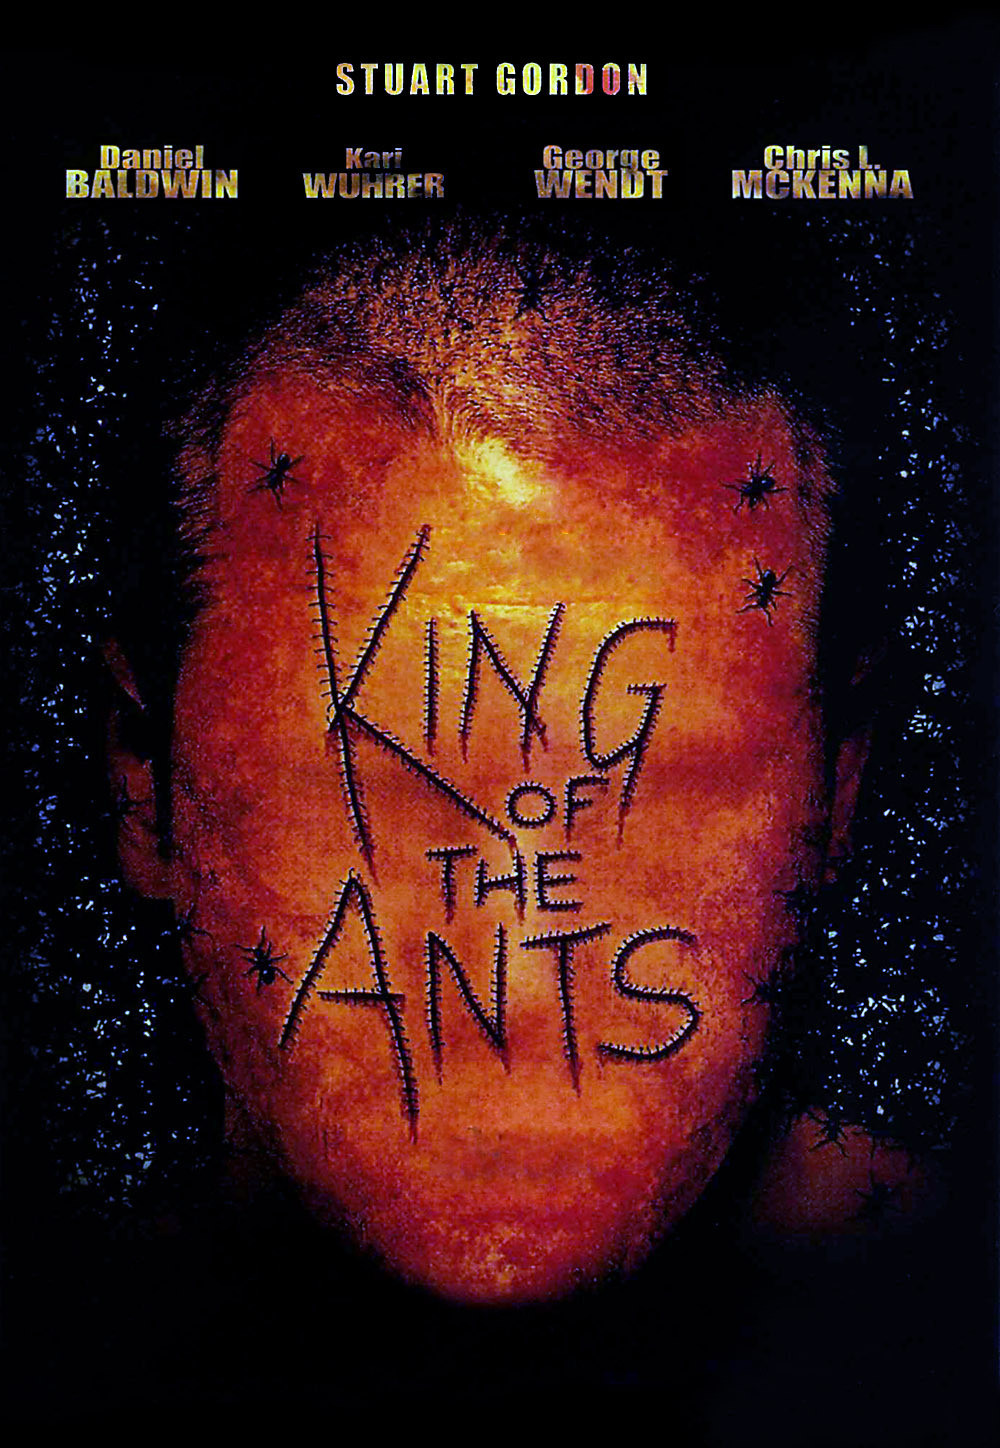 King of the Ants movie